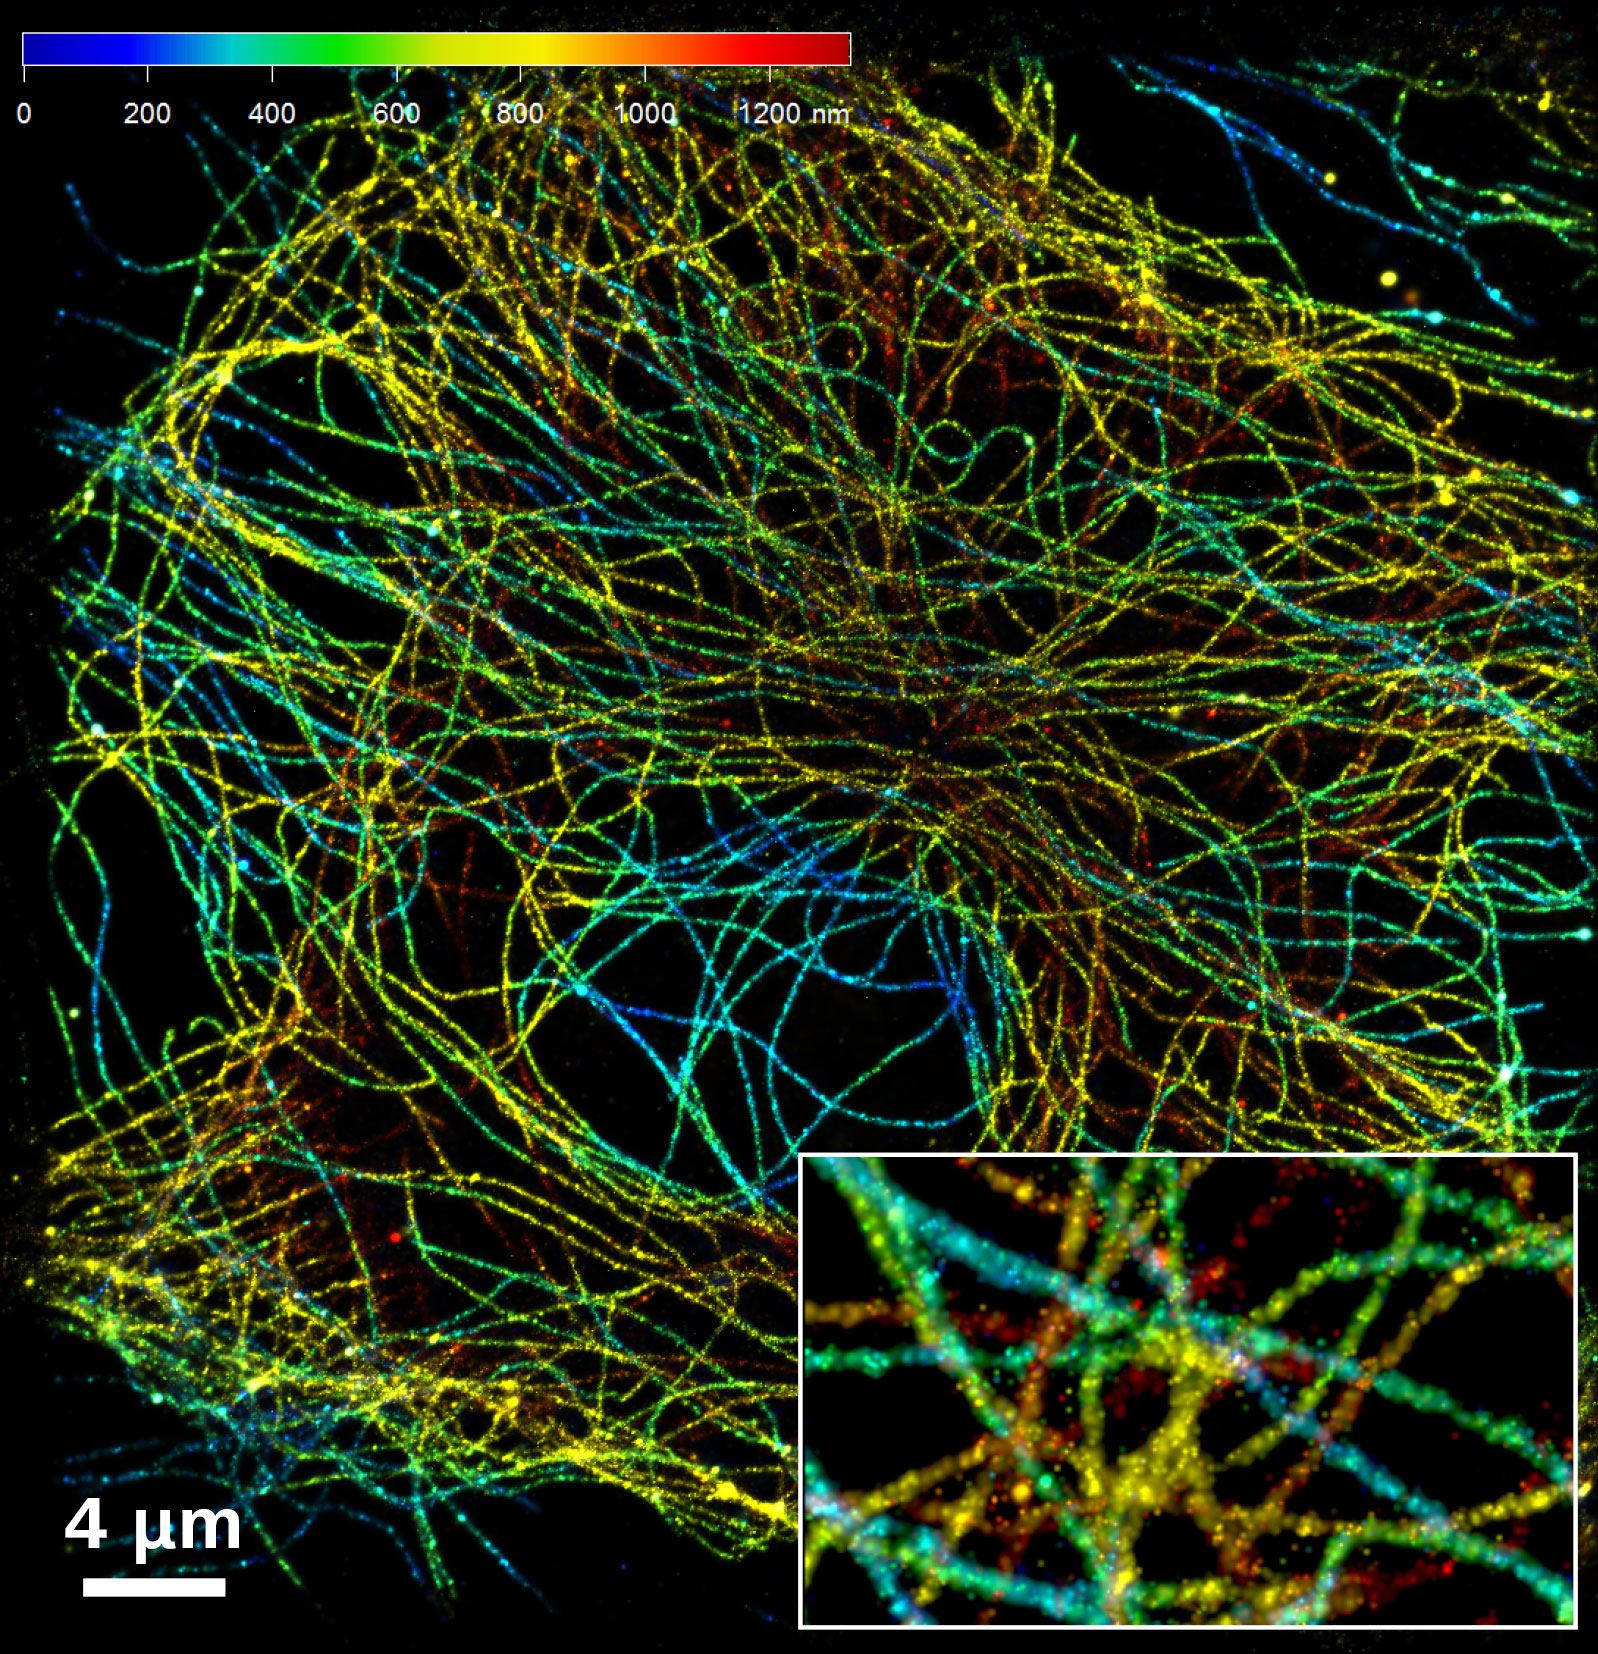 SMLM: With Elyra 7 you can image a z-depth of 1.4 µm in a single acquisition. 